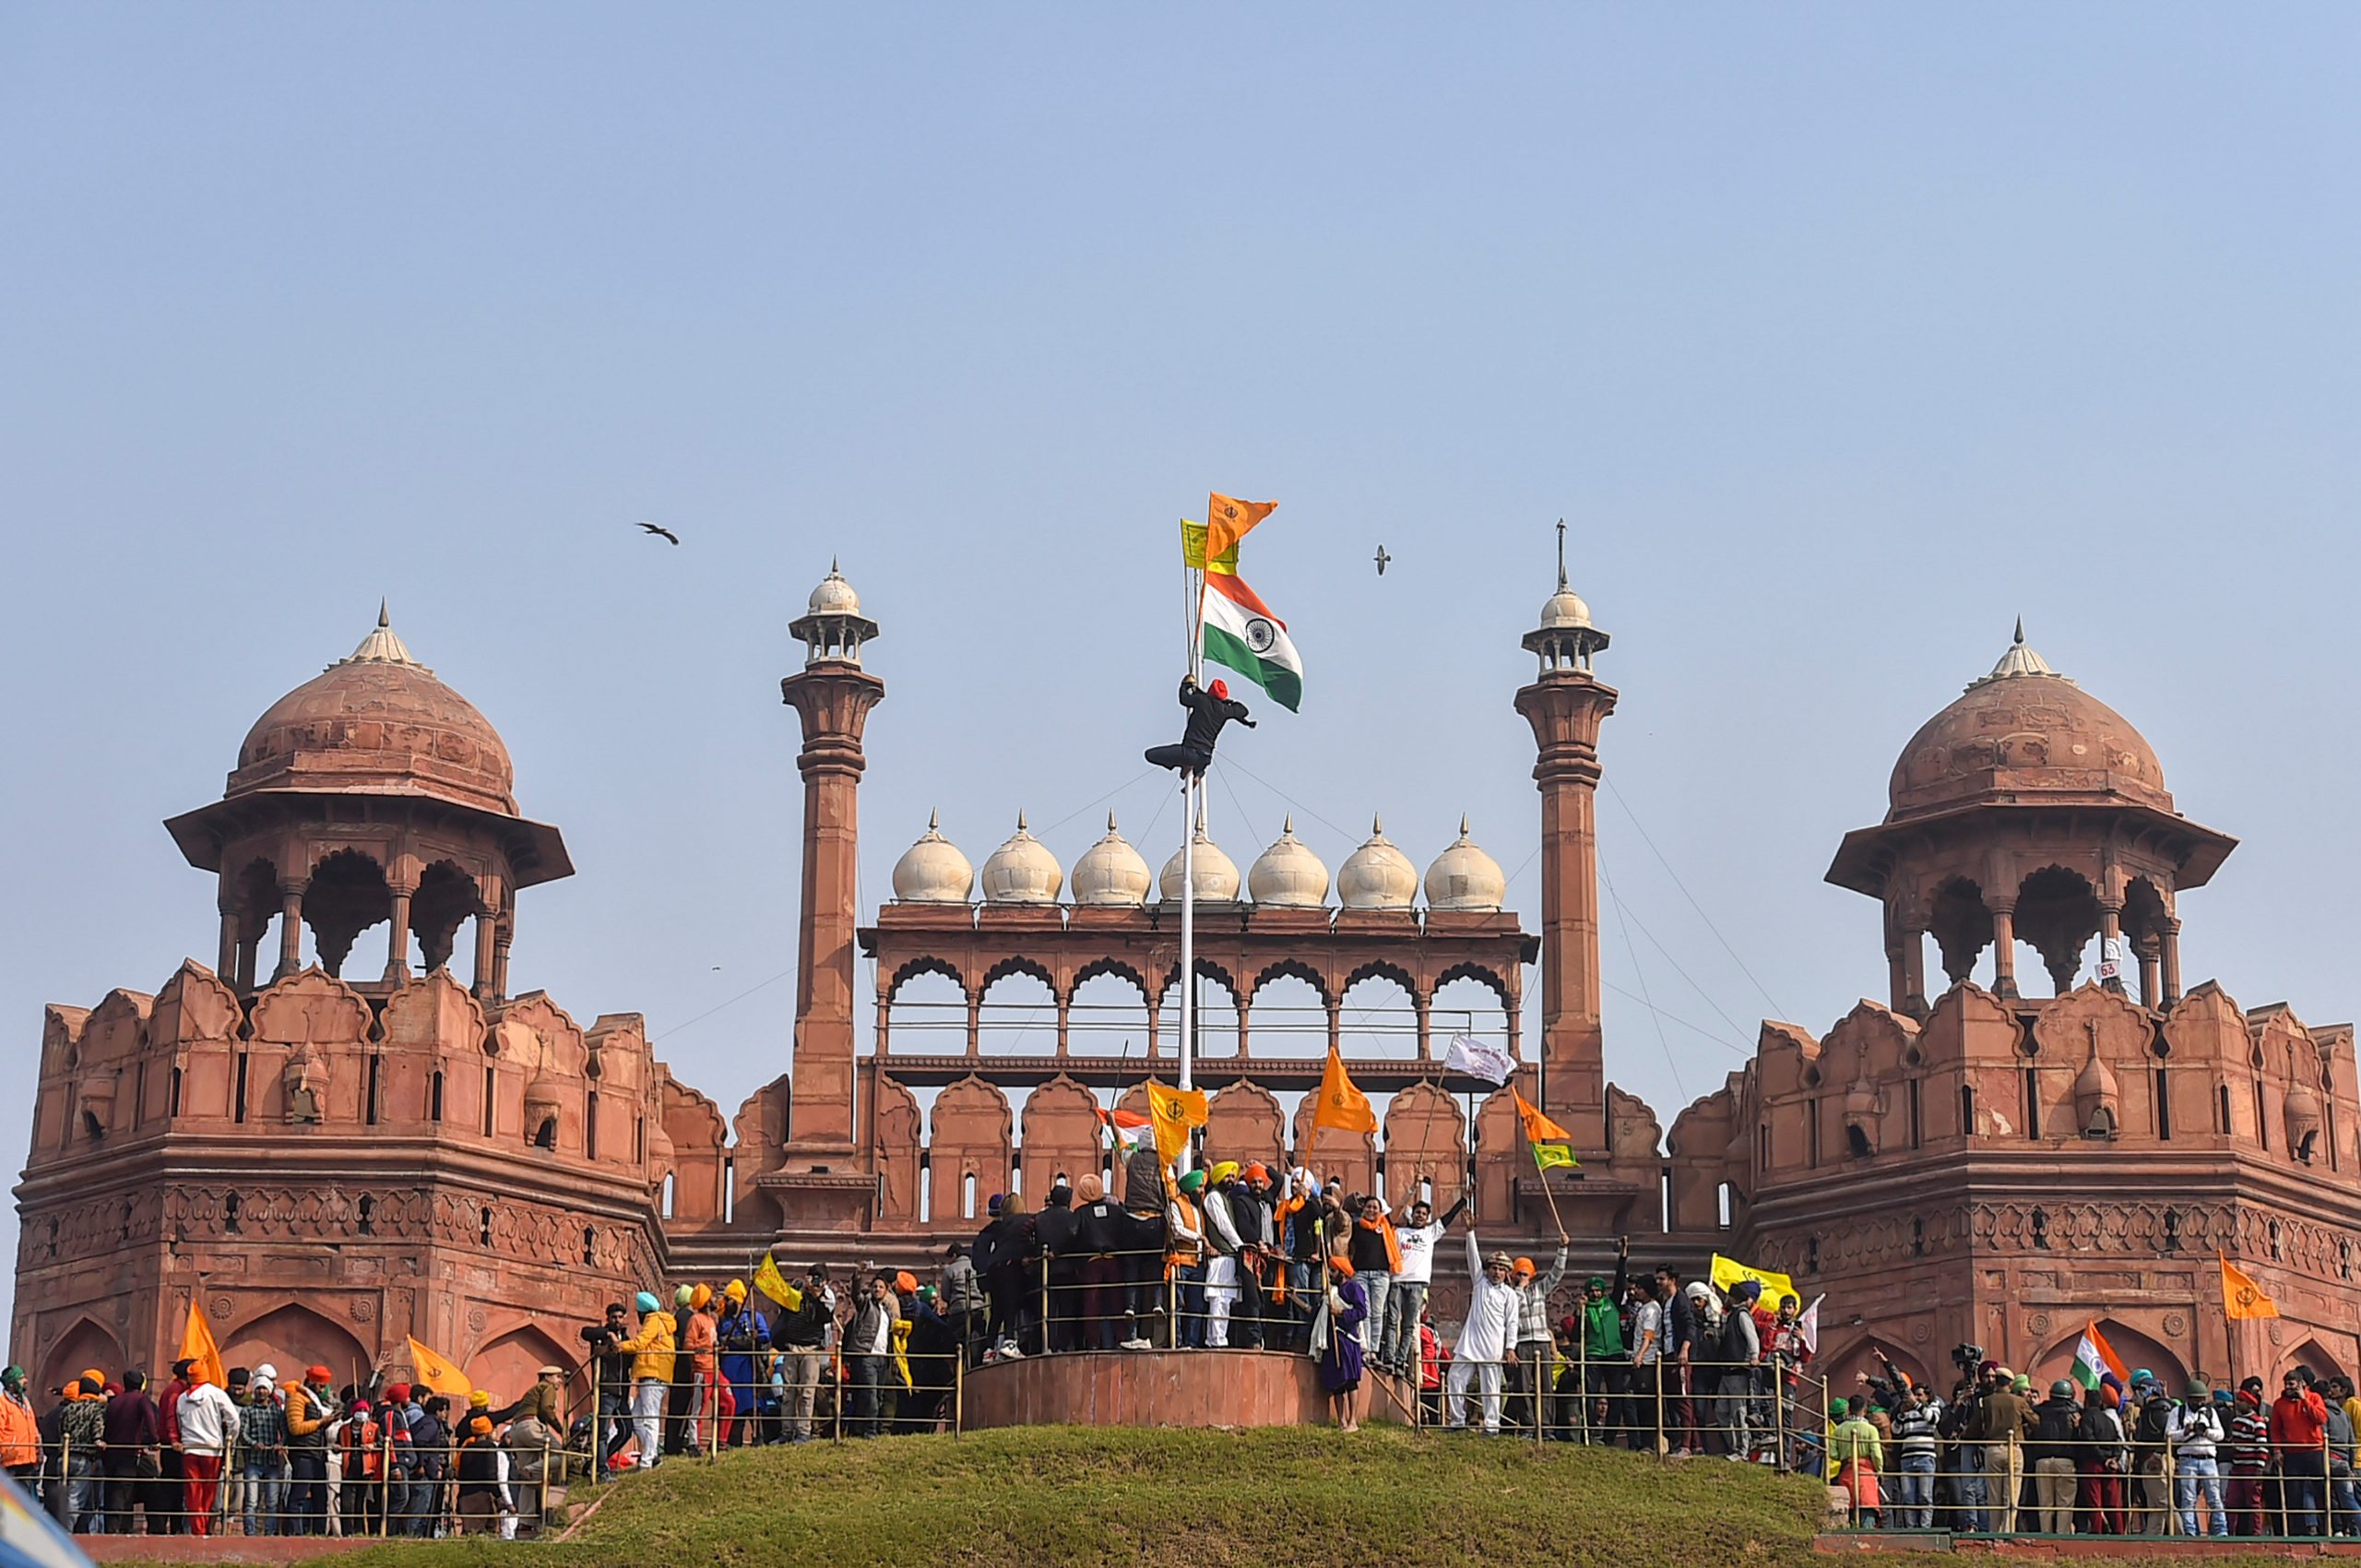 Top intelligence agencies had recommended closing Red Fort from January 20-27: Report